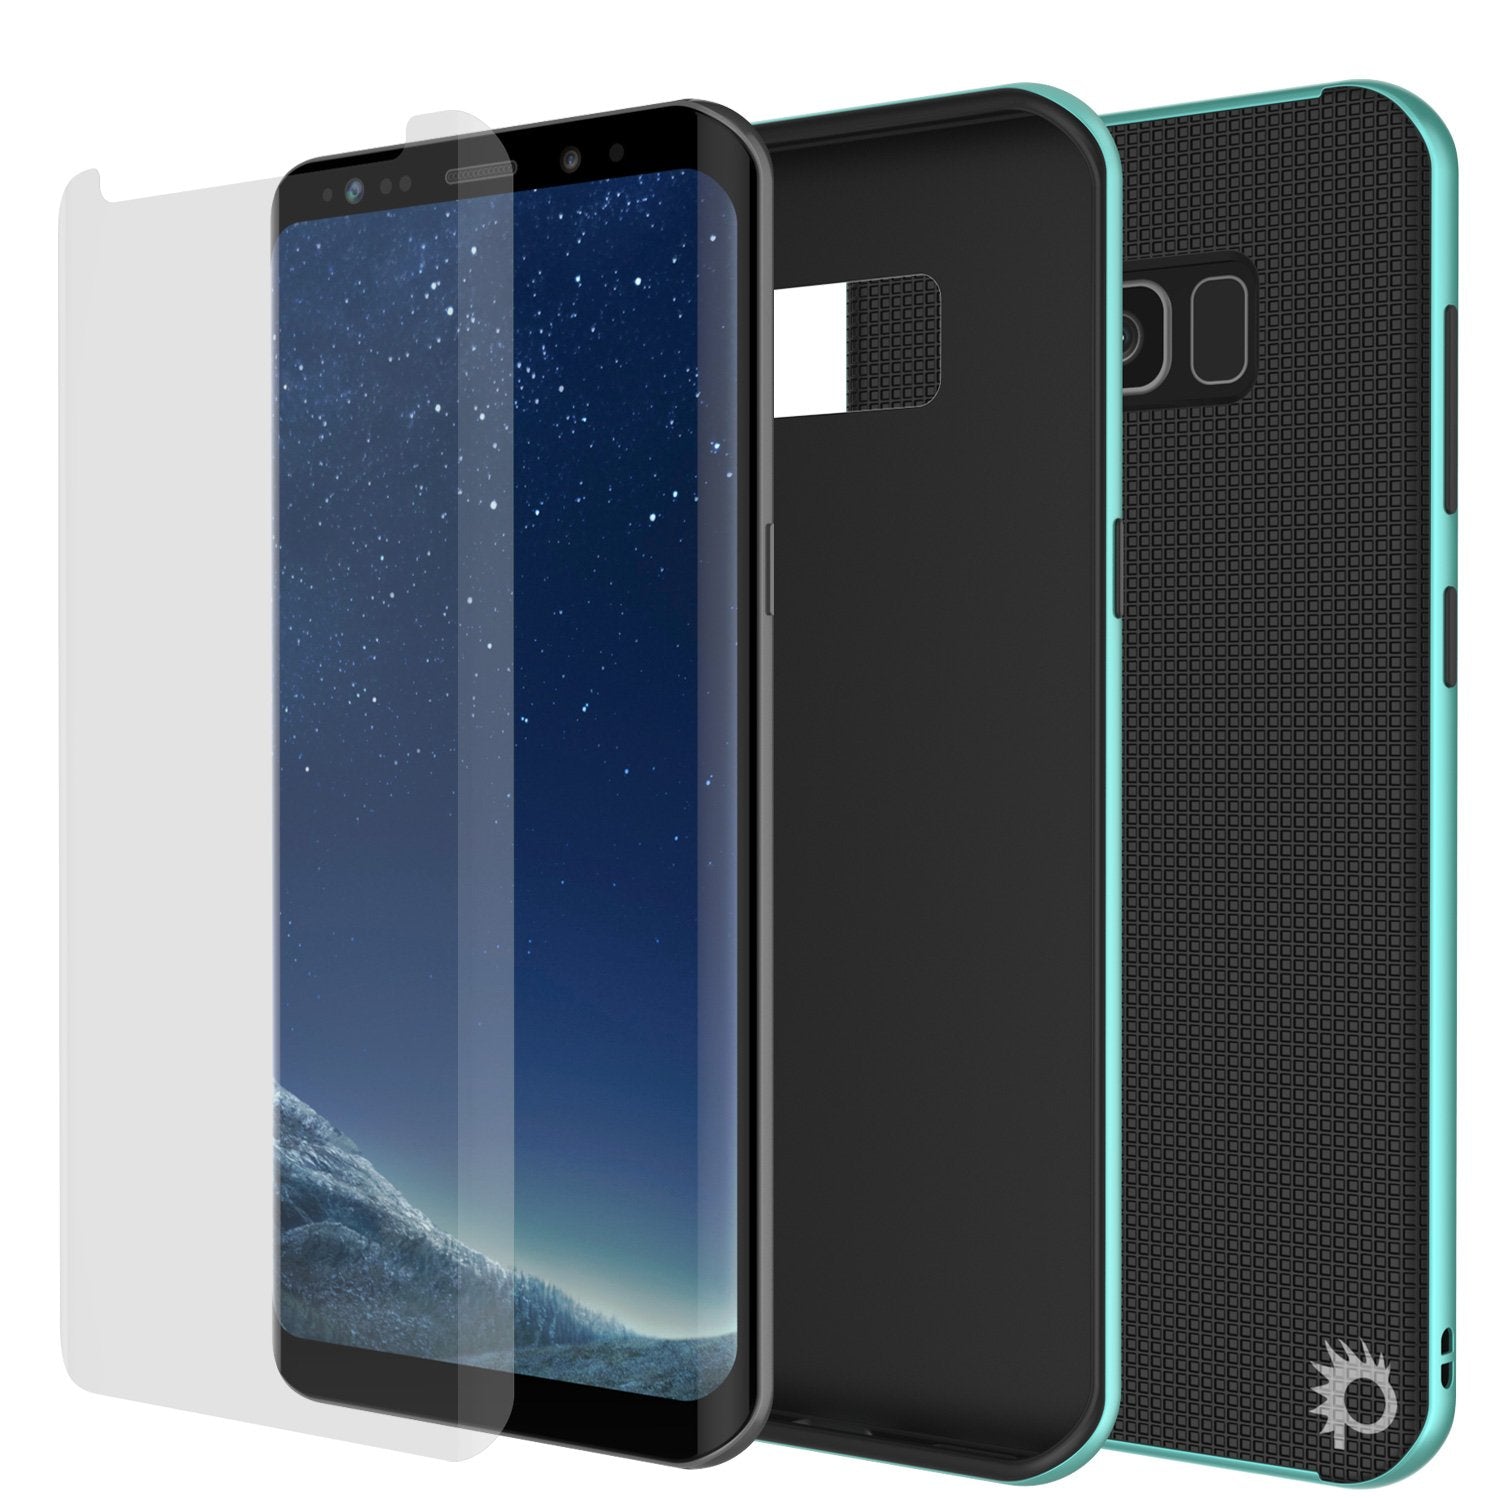 Galaxy S8 Case, PunkCase Stealth Series Hybrid Shockproof Teal Cover